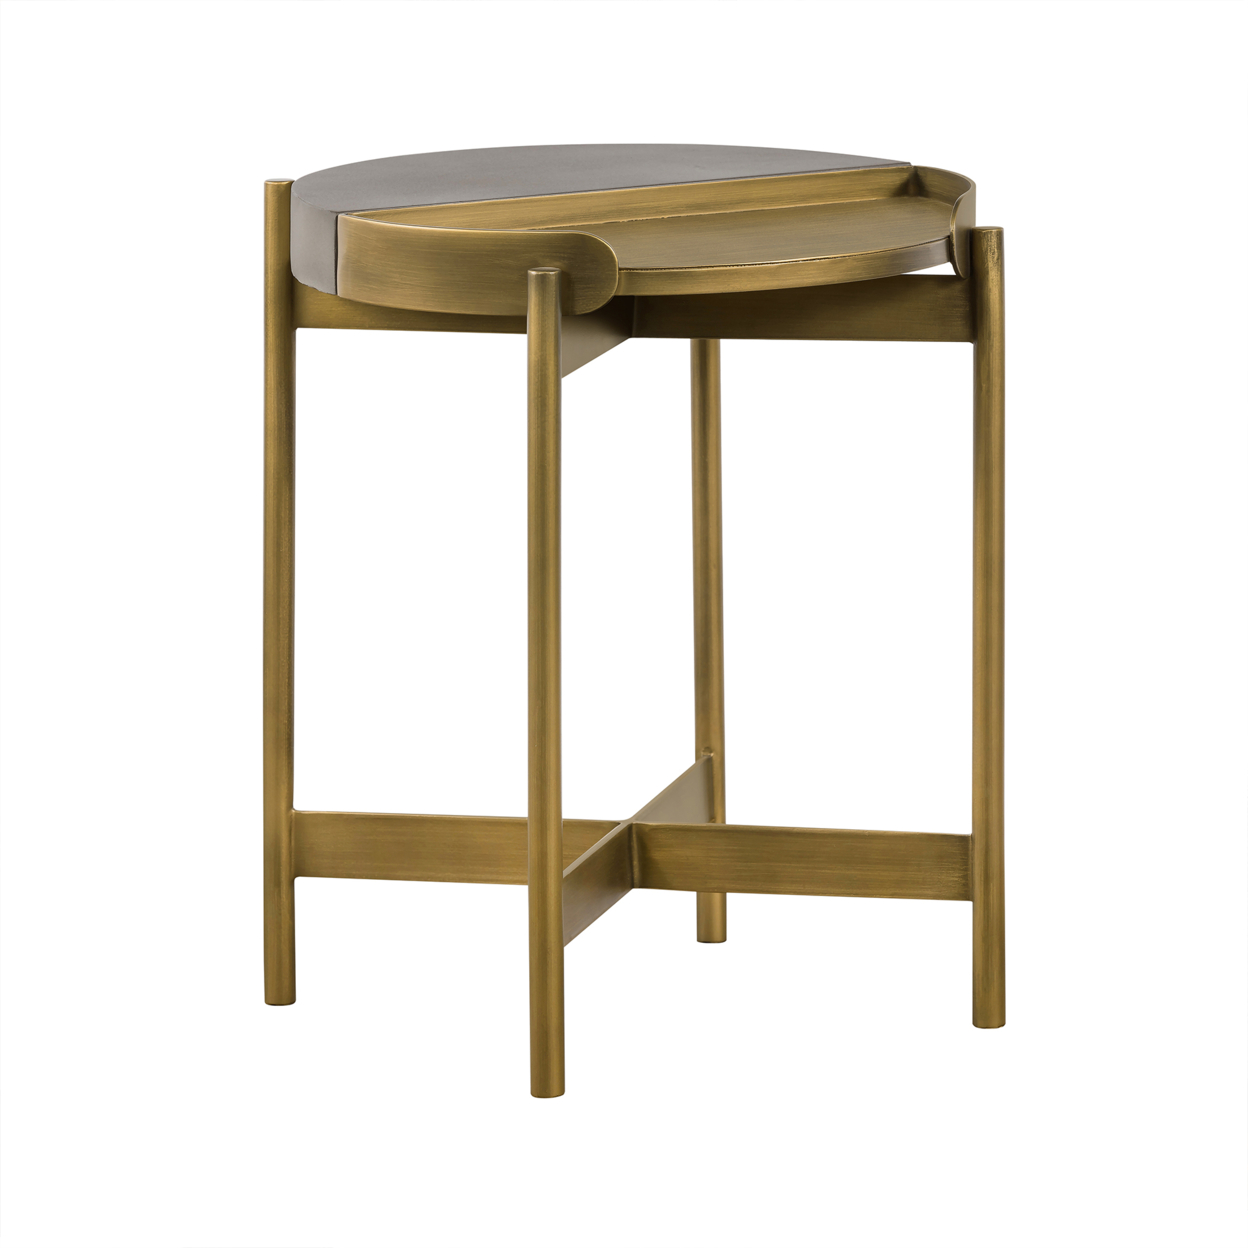 Concrete End Table With X Shape Base, Gray And Gold- Saltoro Sherpi